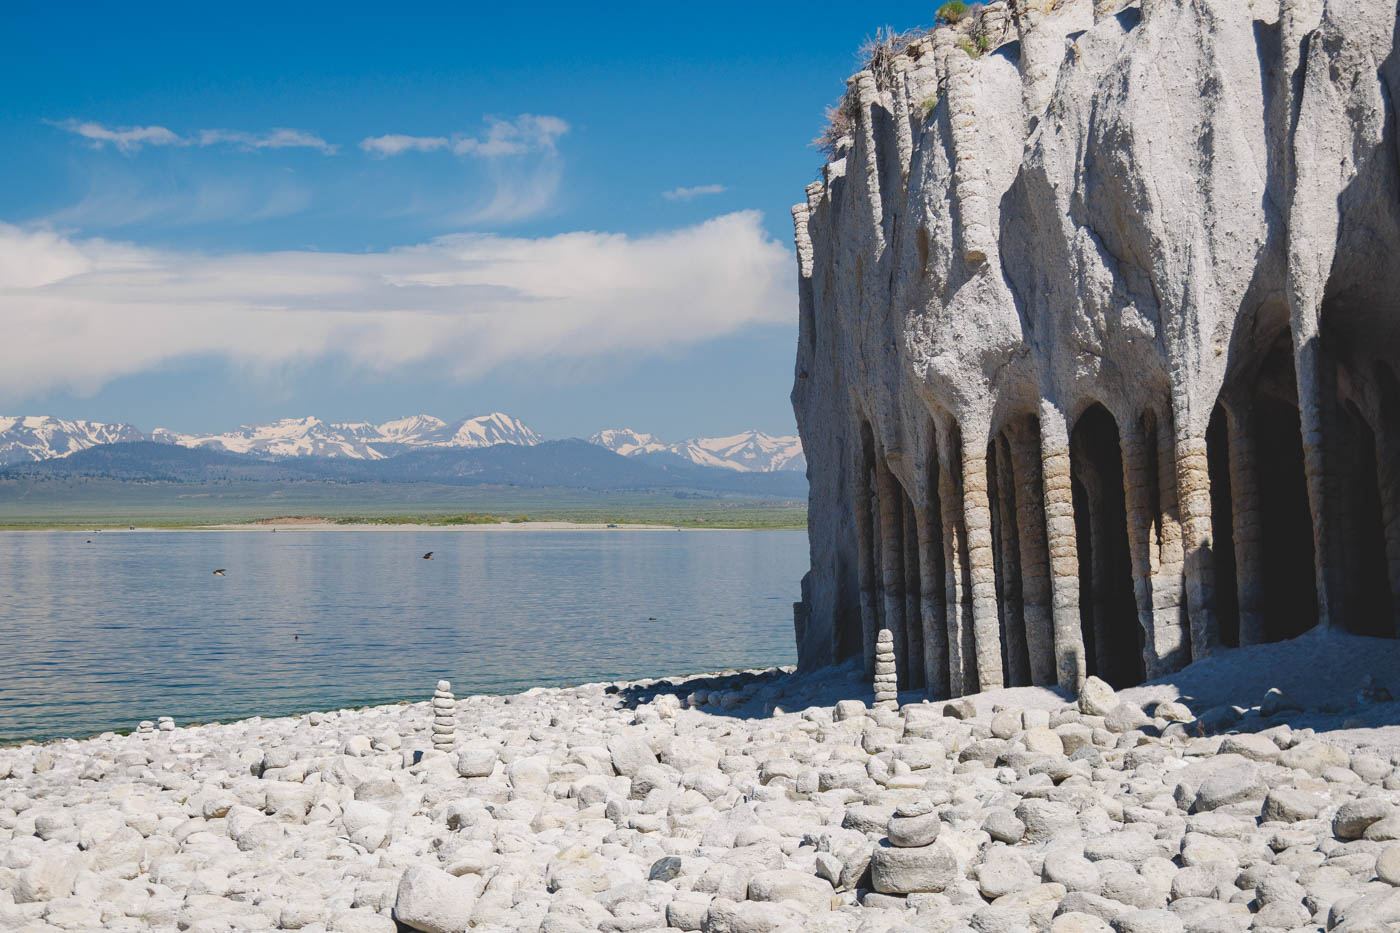 Close up of the Crowley Lake Columns besides the lake with rocks on the shoreline and a view of mountains on a sunny day.